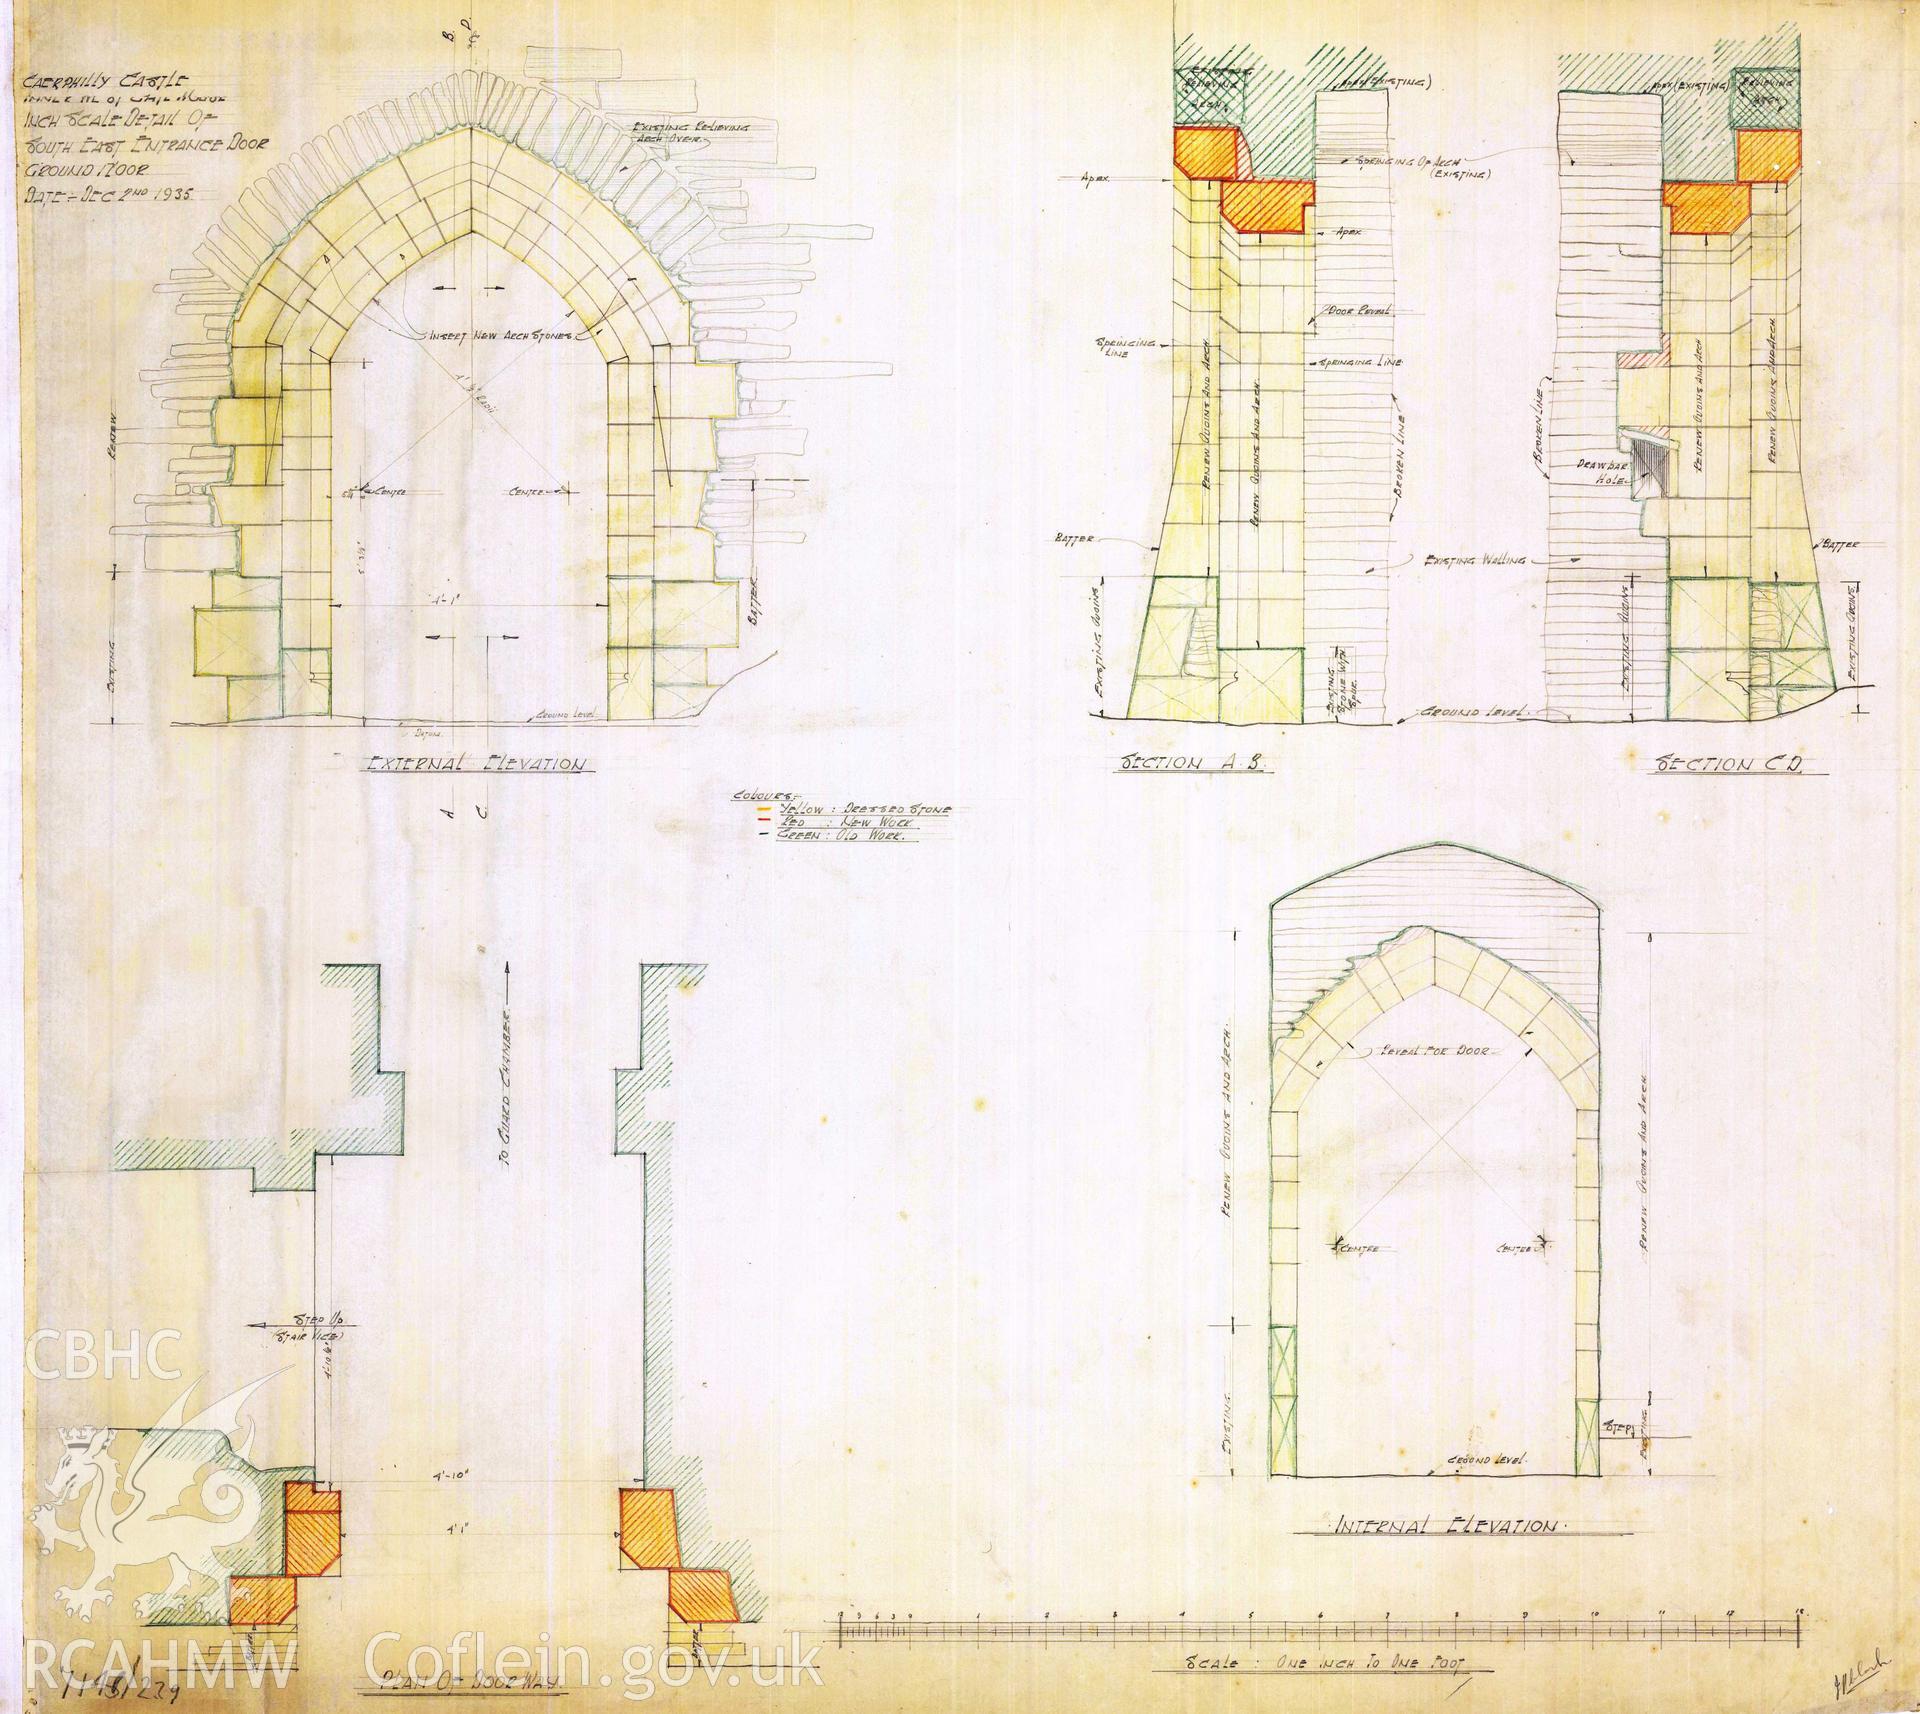 Cadw guardianship monument drawing of Caerphilly Castle. Inner W gate, S rear doorway. Cadw Ref. No:714B/239. Scale 1:12.